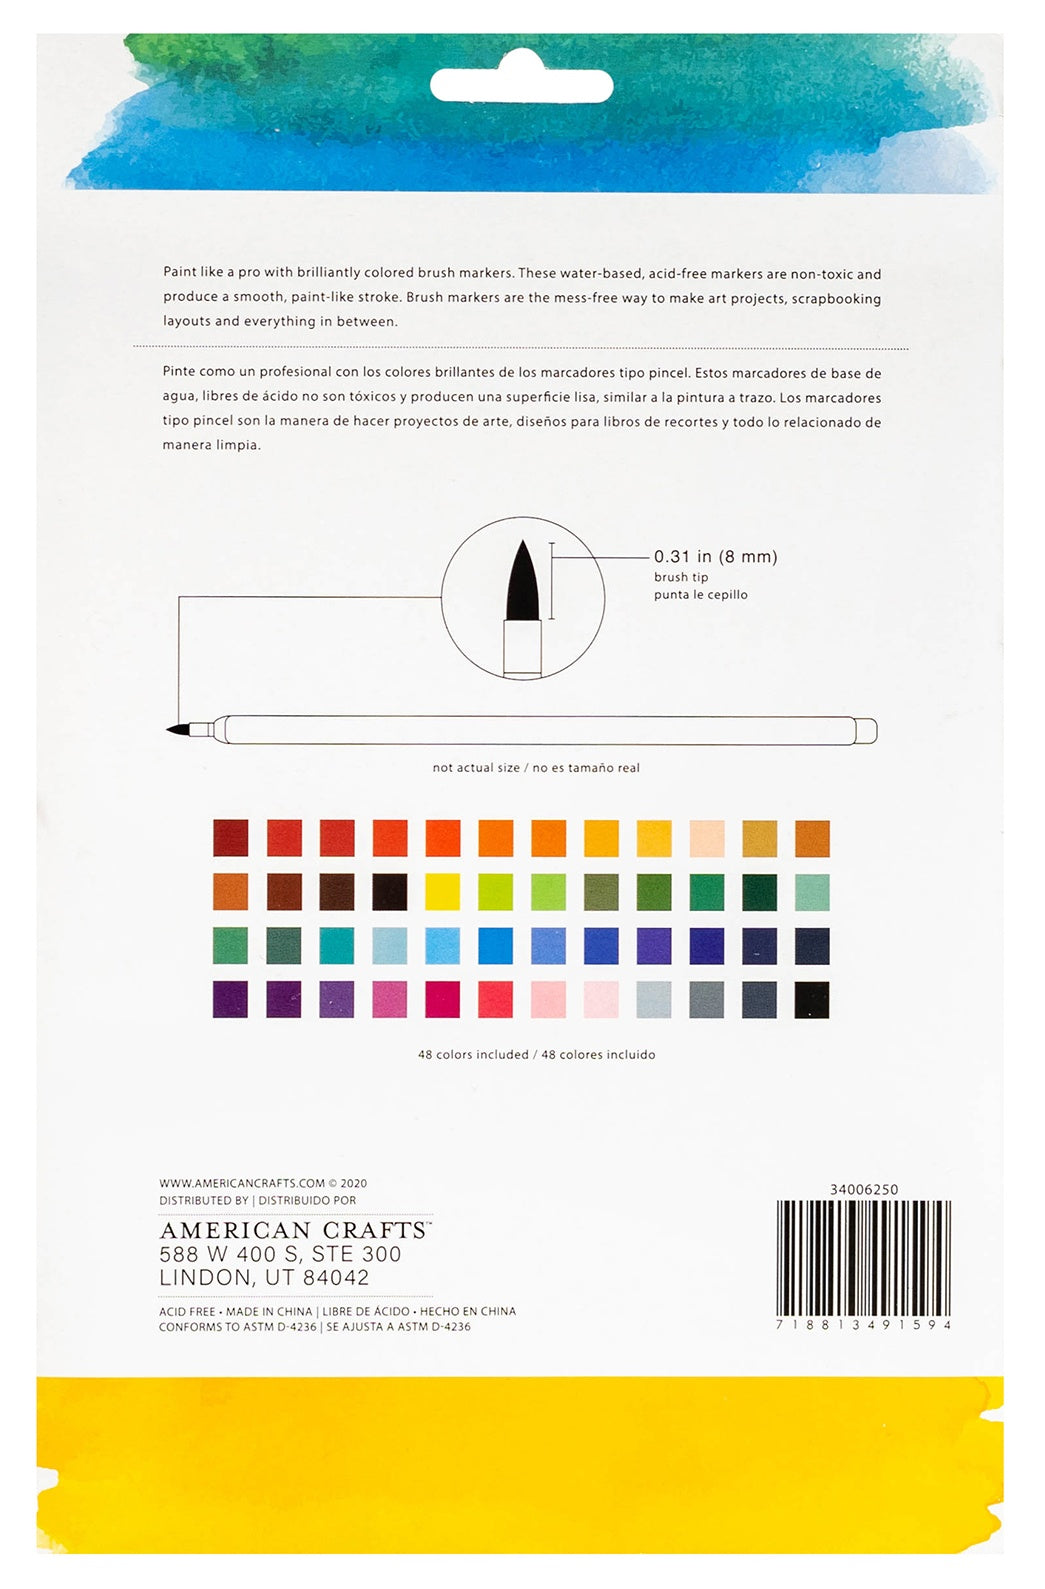 $10/mo - Finance ARTIFY 48 colors Alcohol Brush Markers, Brush